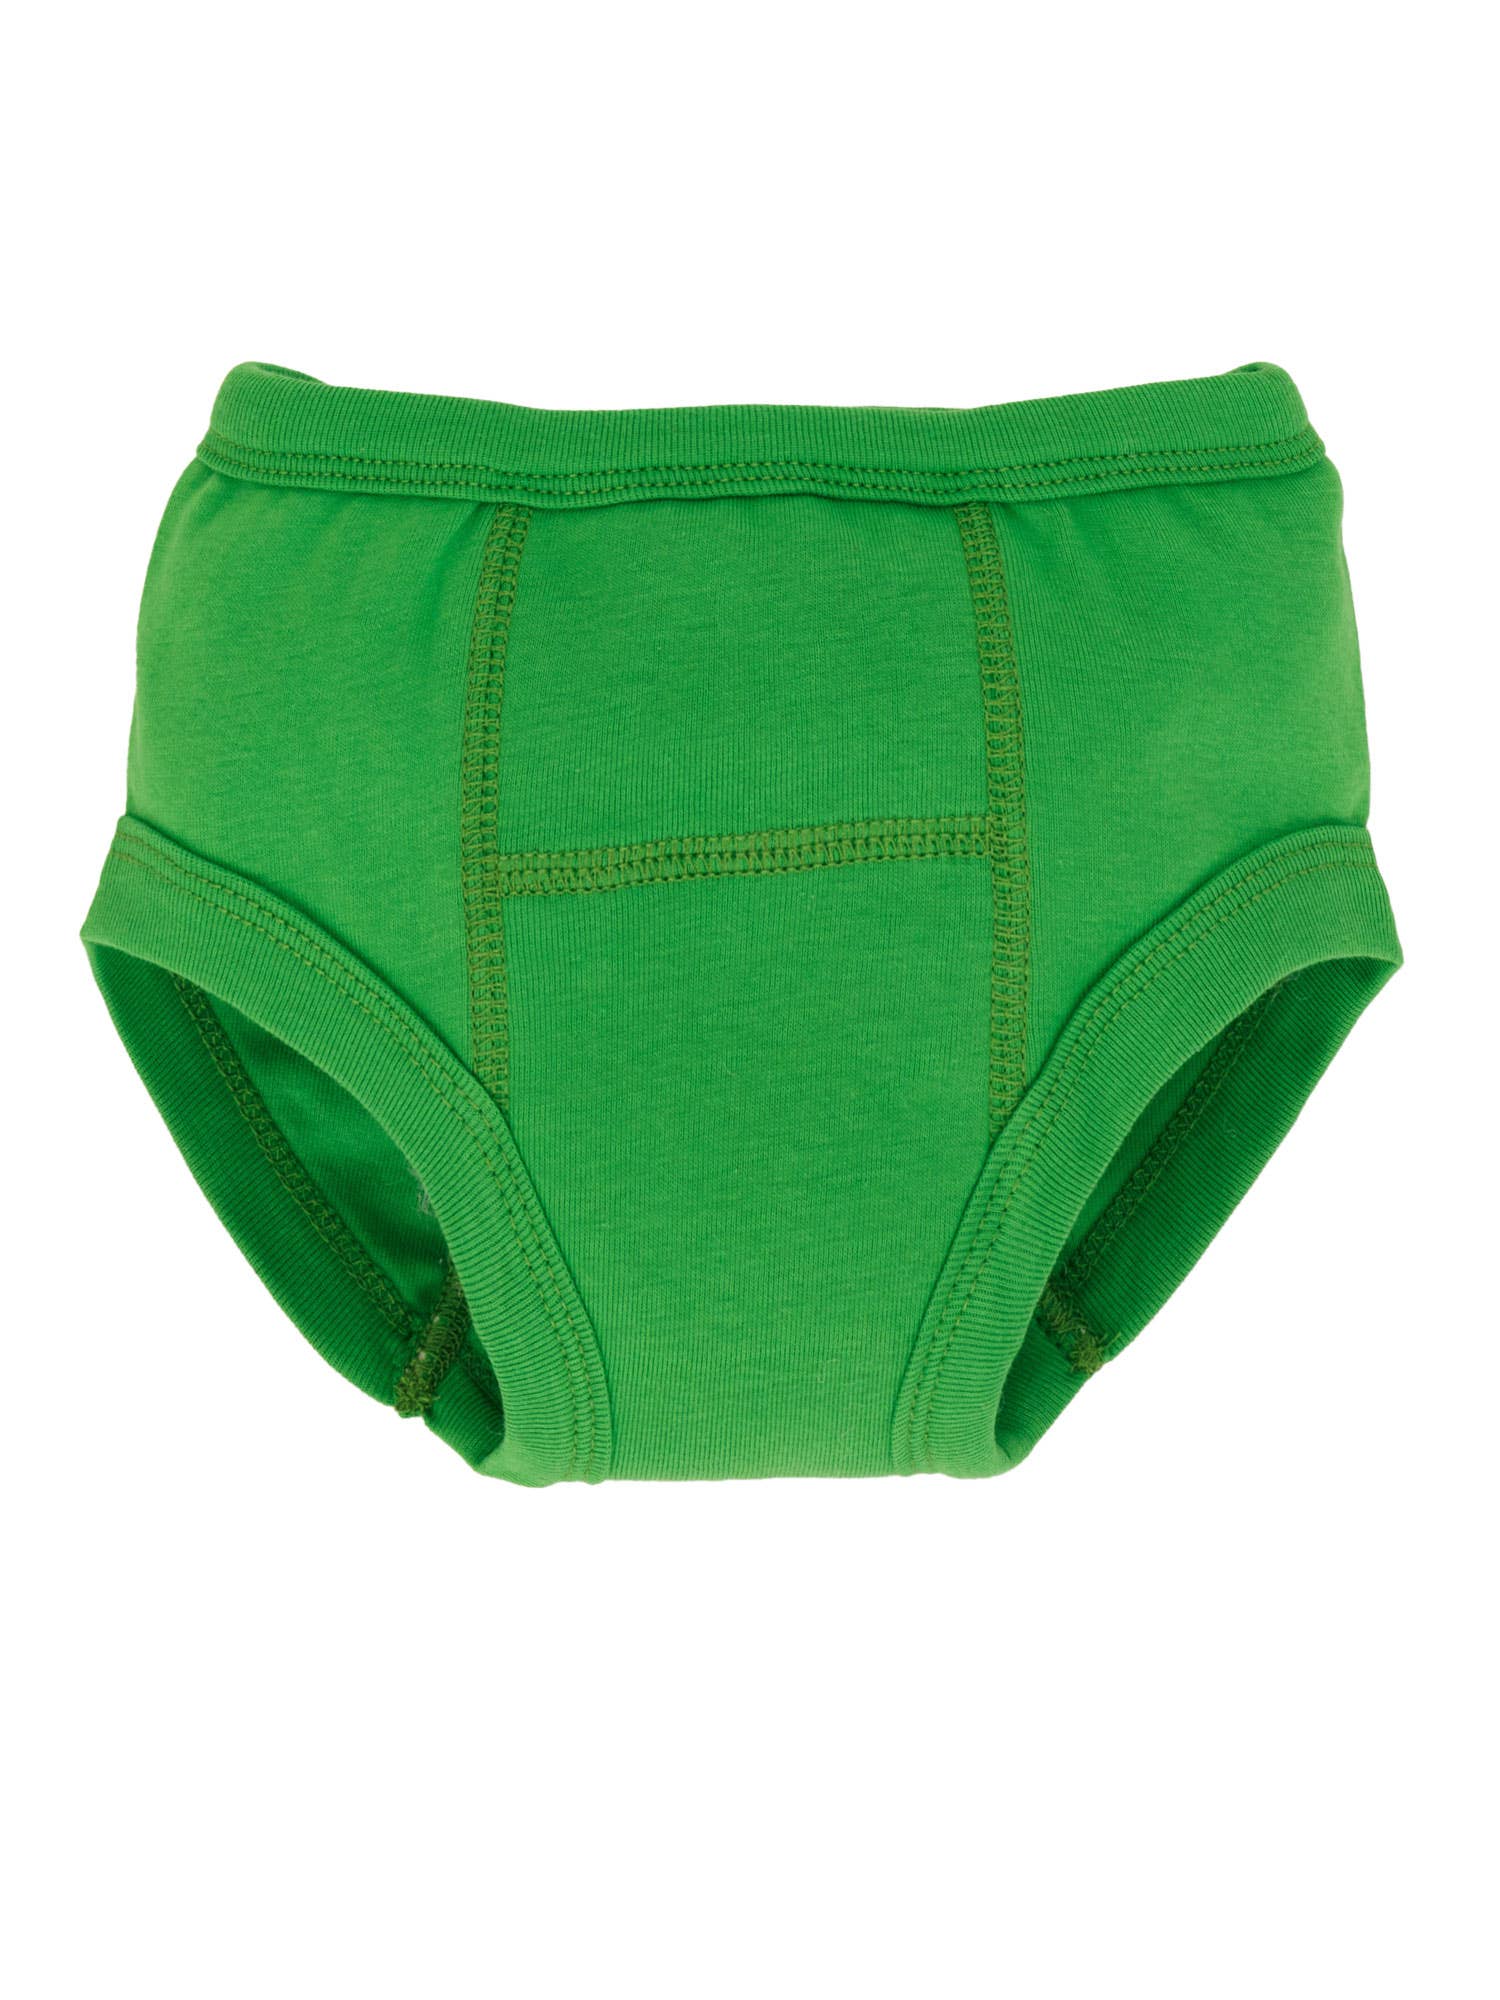 Solid Green Potty Training Pants - Organic Boutique